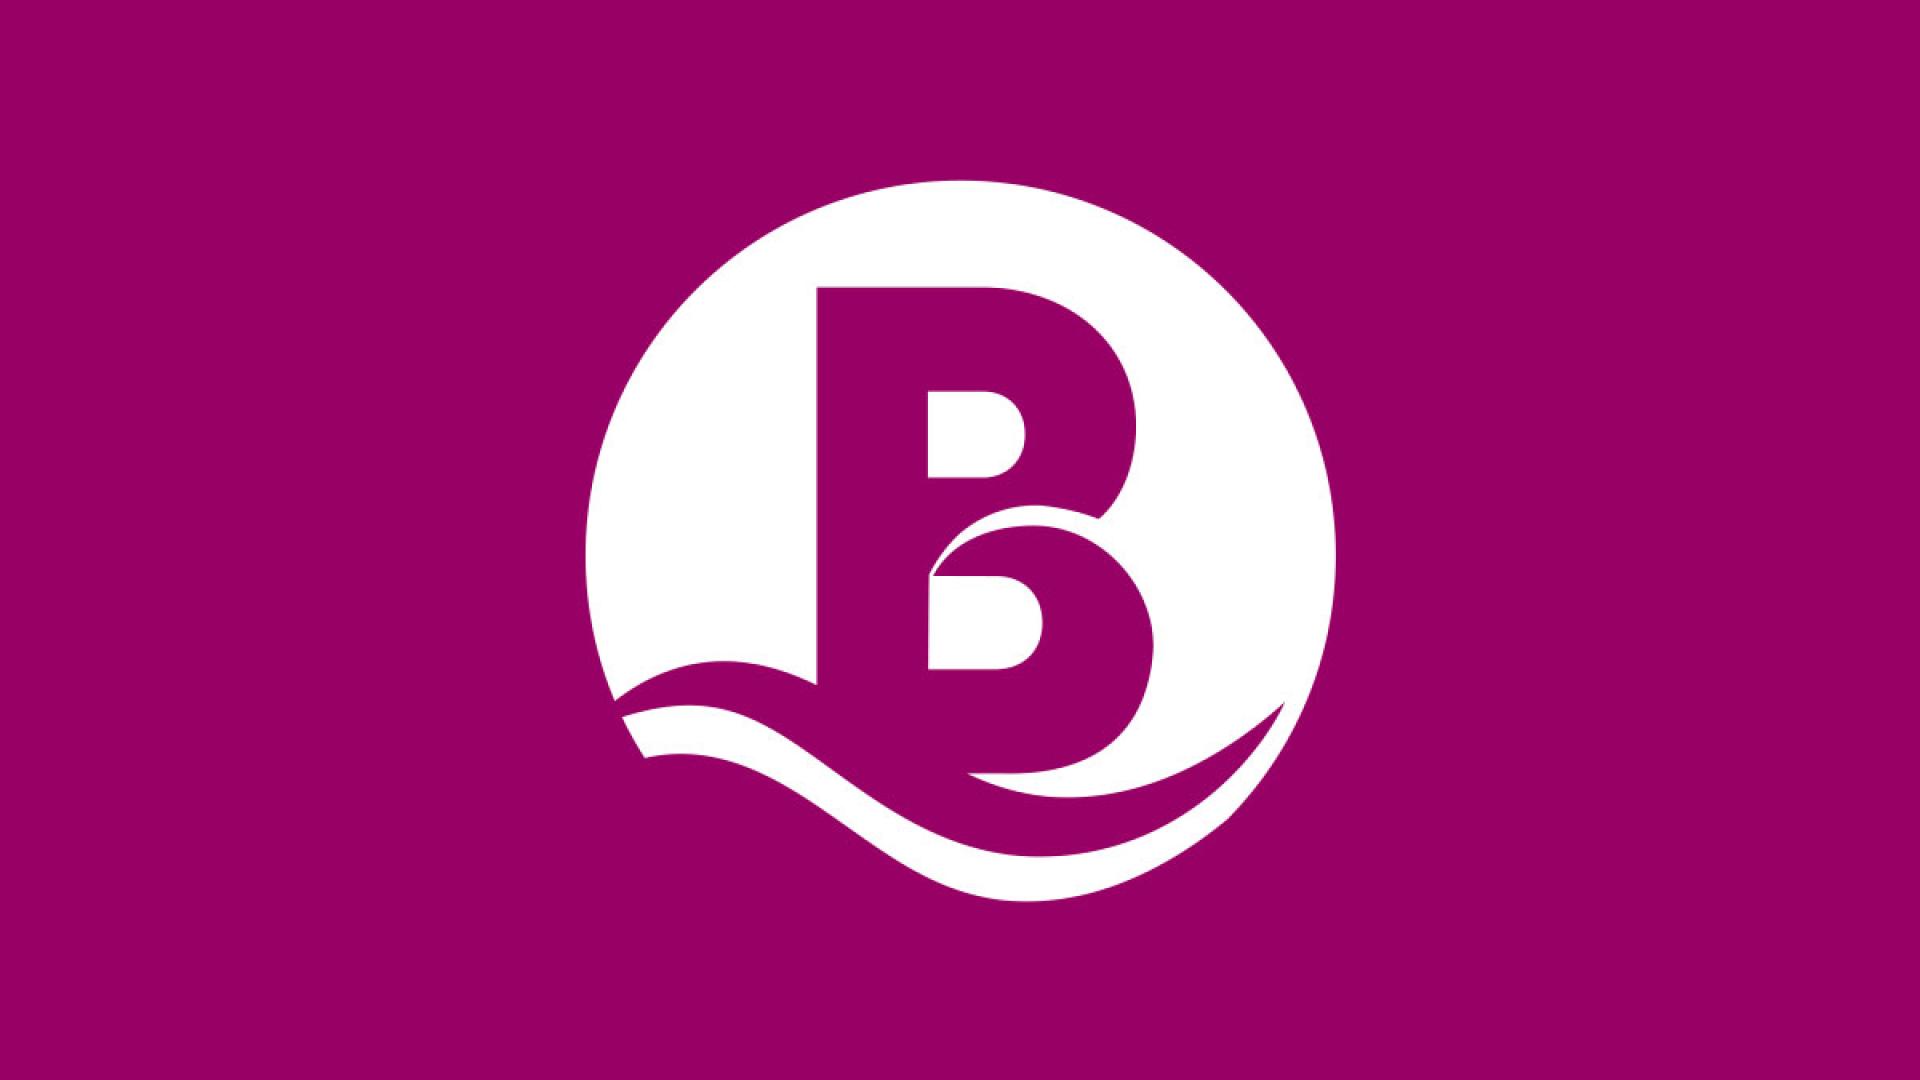 City of Barrie icon on magenta background